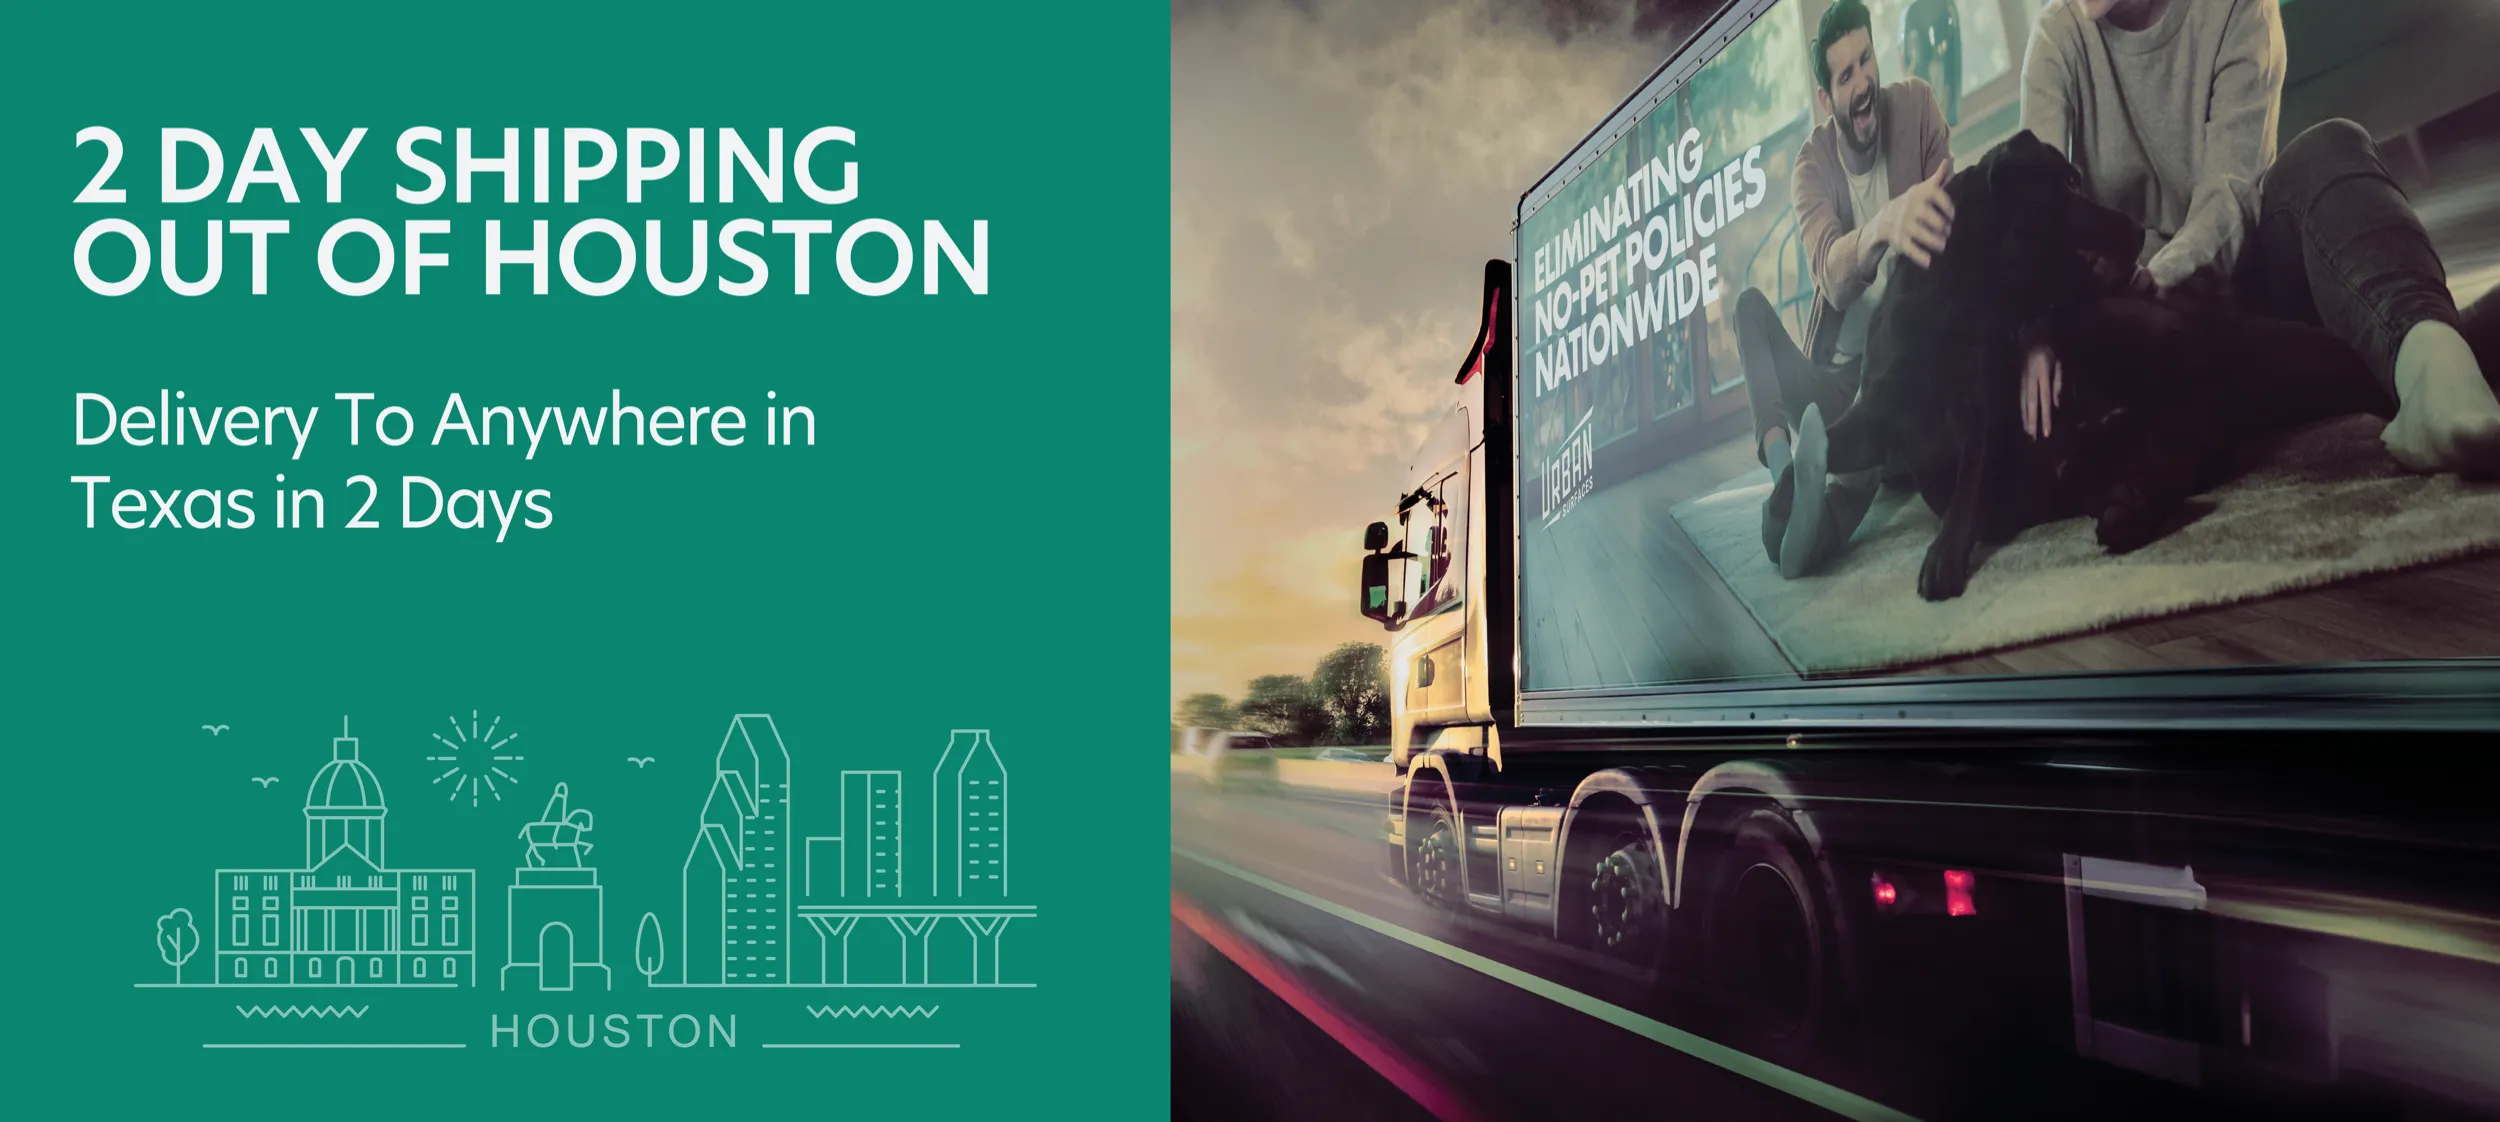 Green square on left with "2 DAY SHIPPING OUT OF HOUSTON" headline and "Delivery to anywhere in Texas in 2 days" below. Below that, white line drawing of Houston with Houston text. On the right a Urban Surfaces delivery truck with "Eliminating no-pet policies nationwide" text and image of people playing with dog in livingroom.